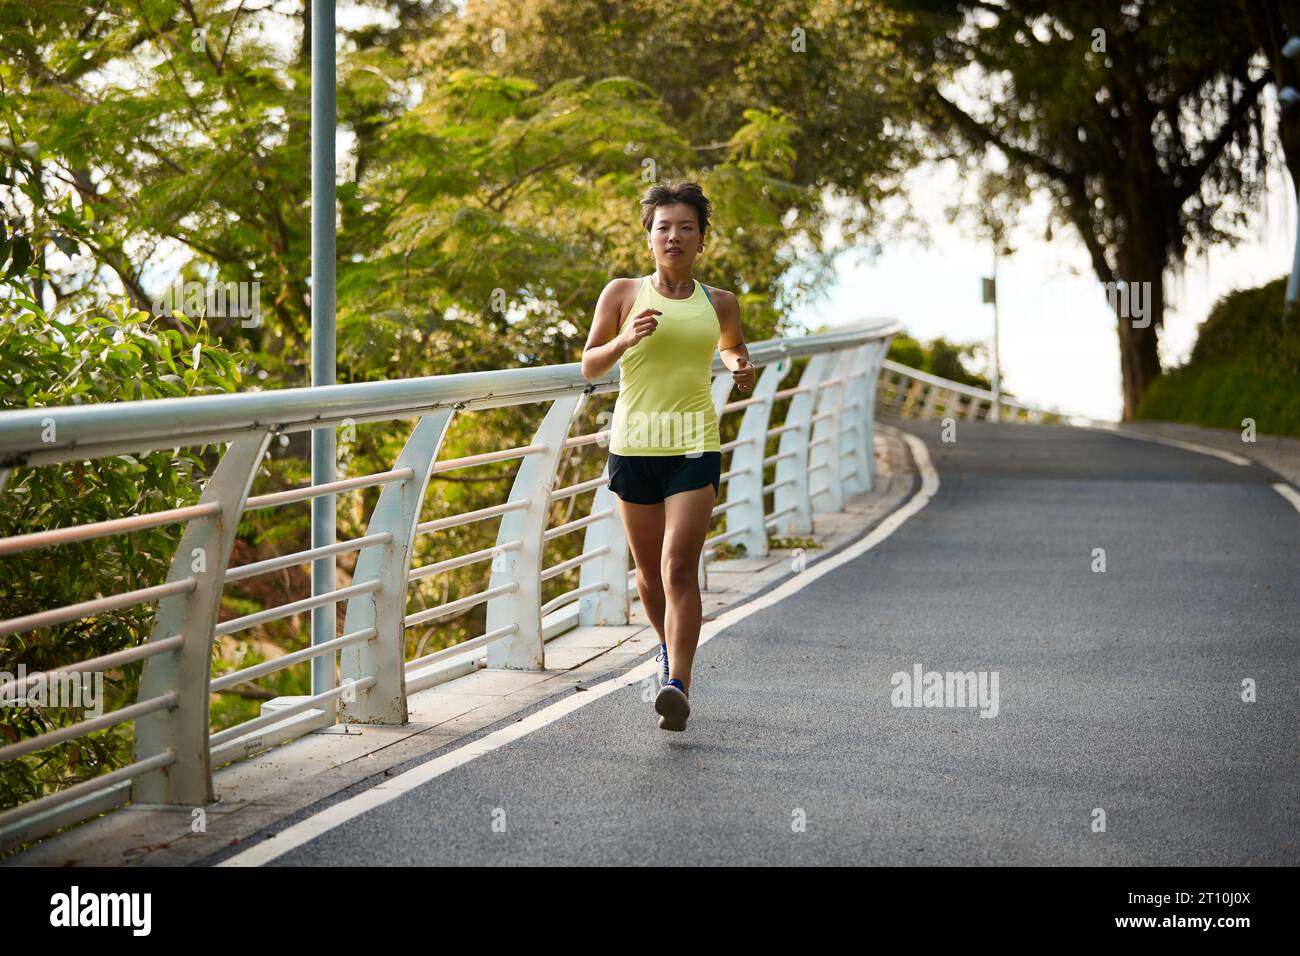 young asian woman female jogger exercising outdoors in city park Stock Photo